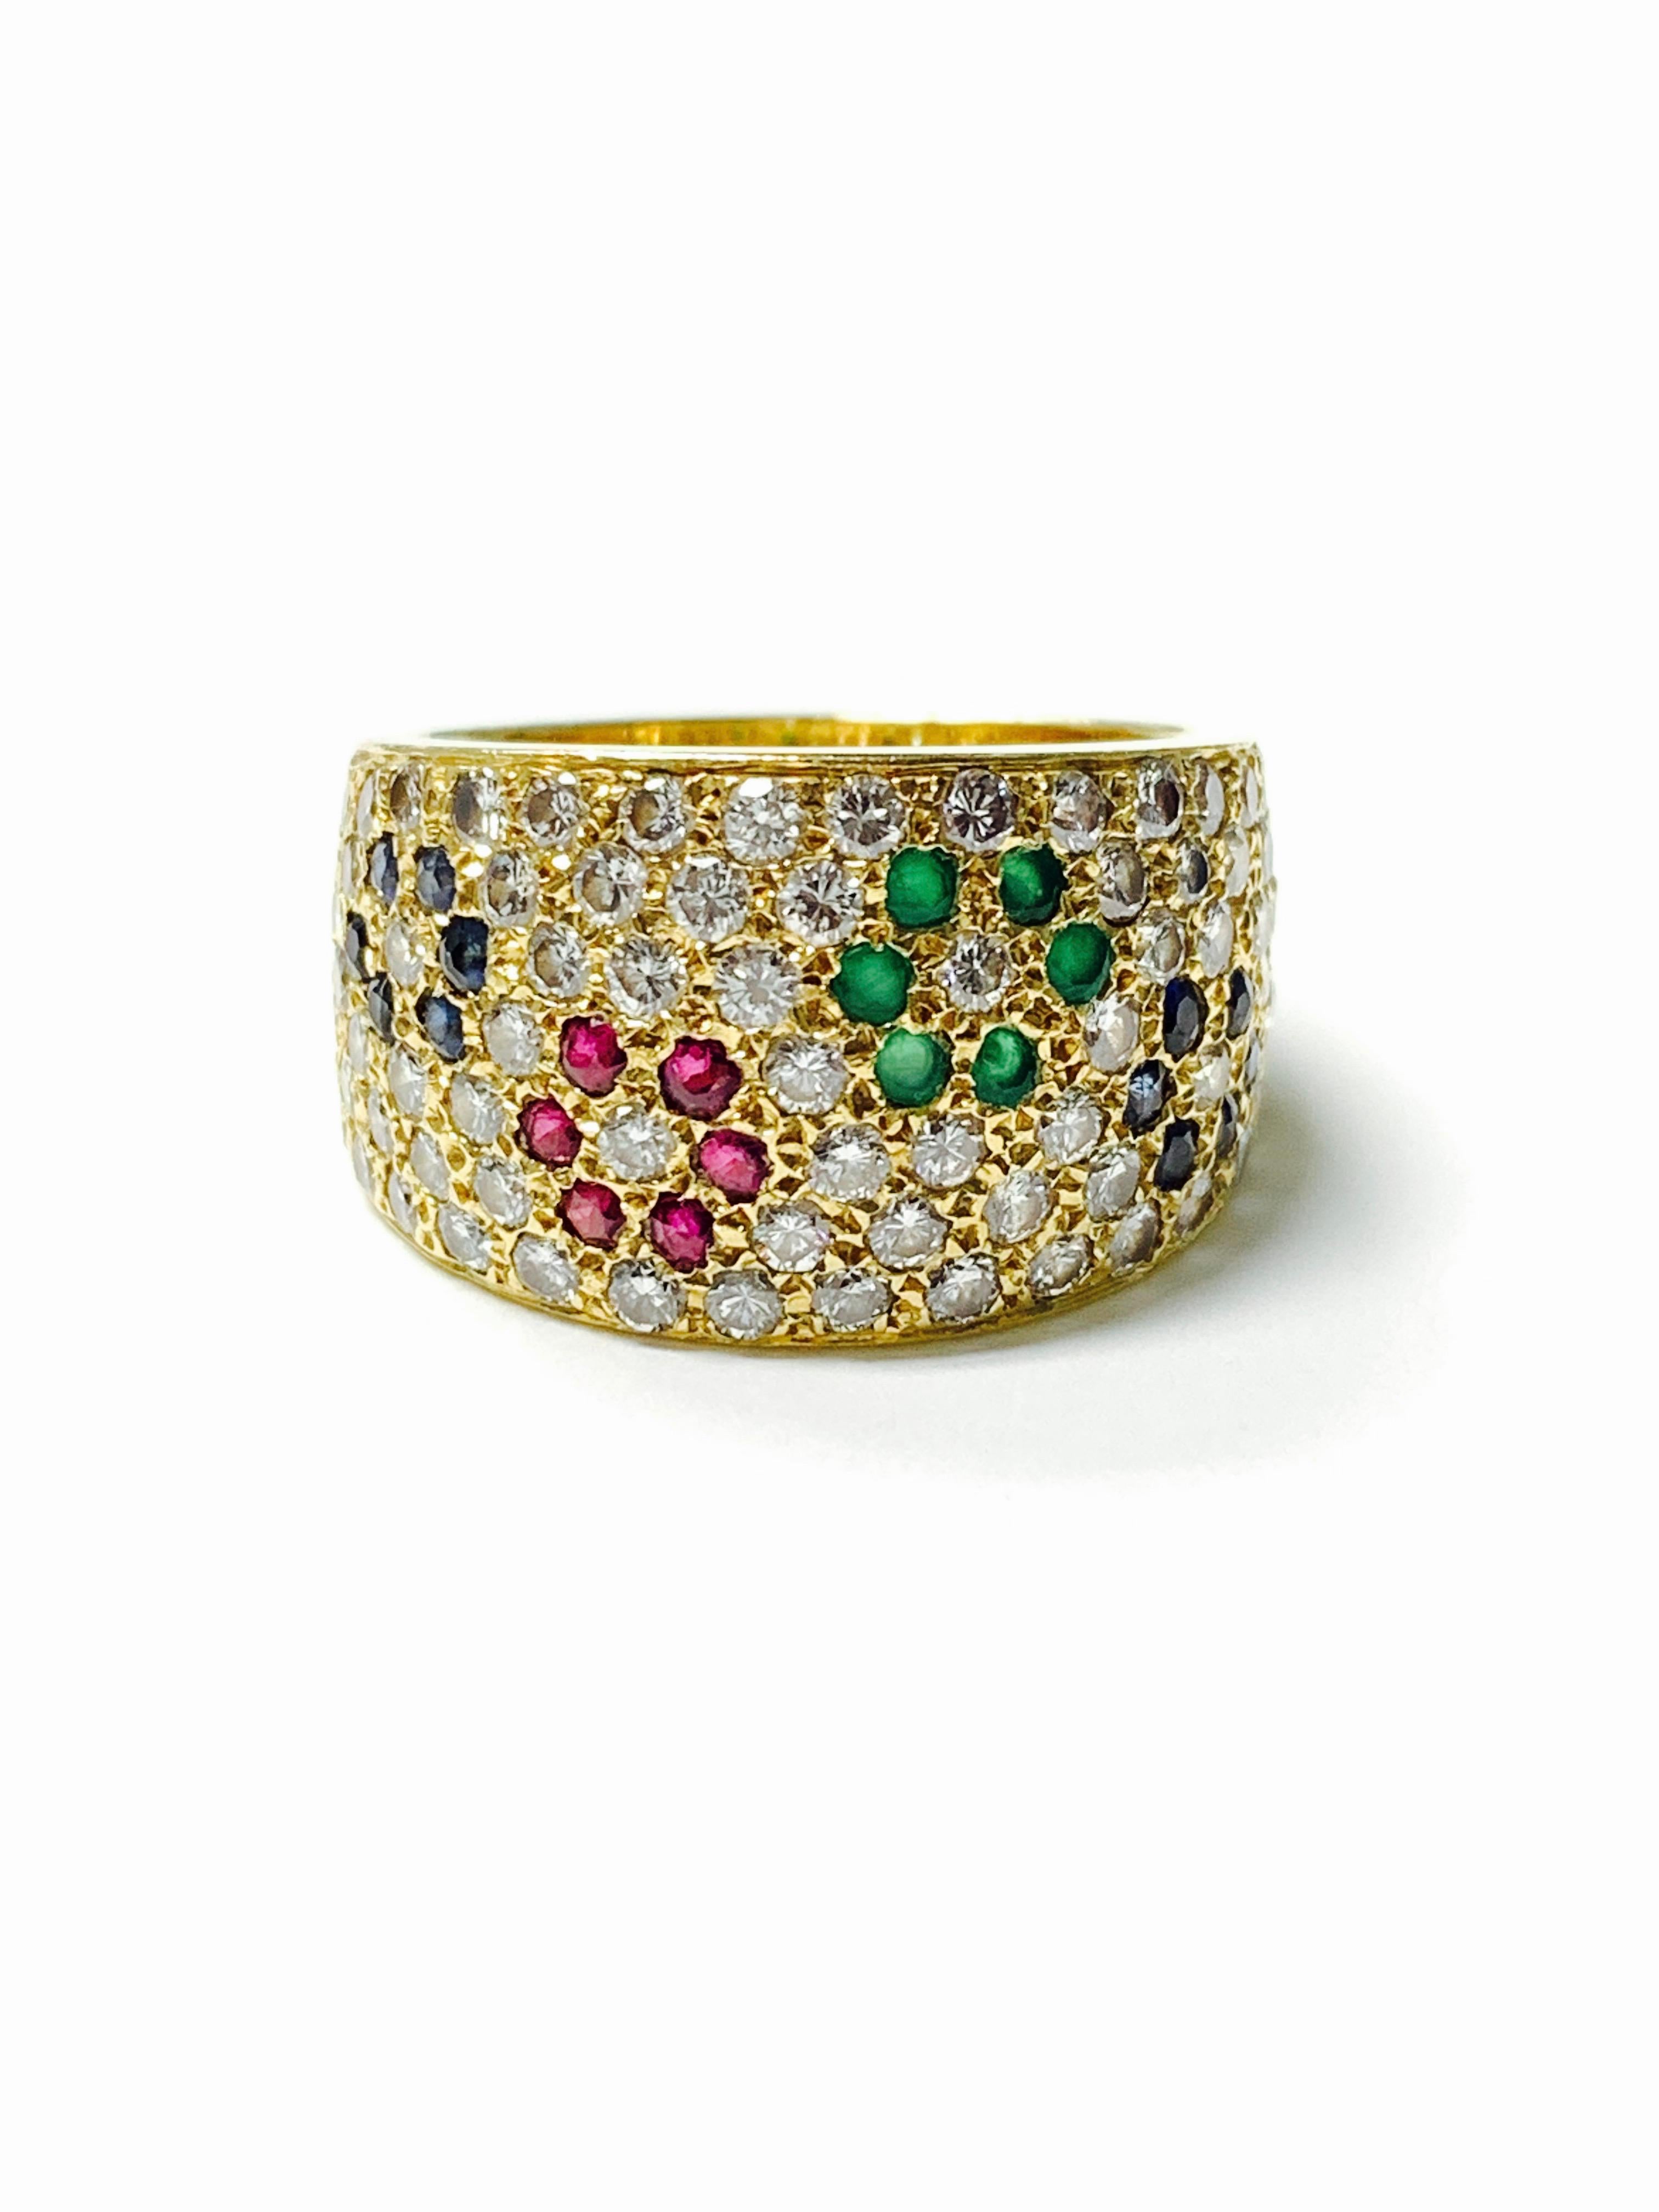 Women's or Men's Diamond, Ruby, Emerald and Blue Sapphire Ring in 18 K Gold